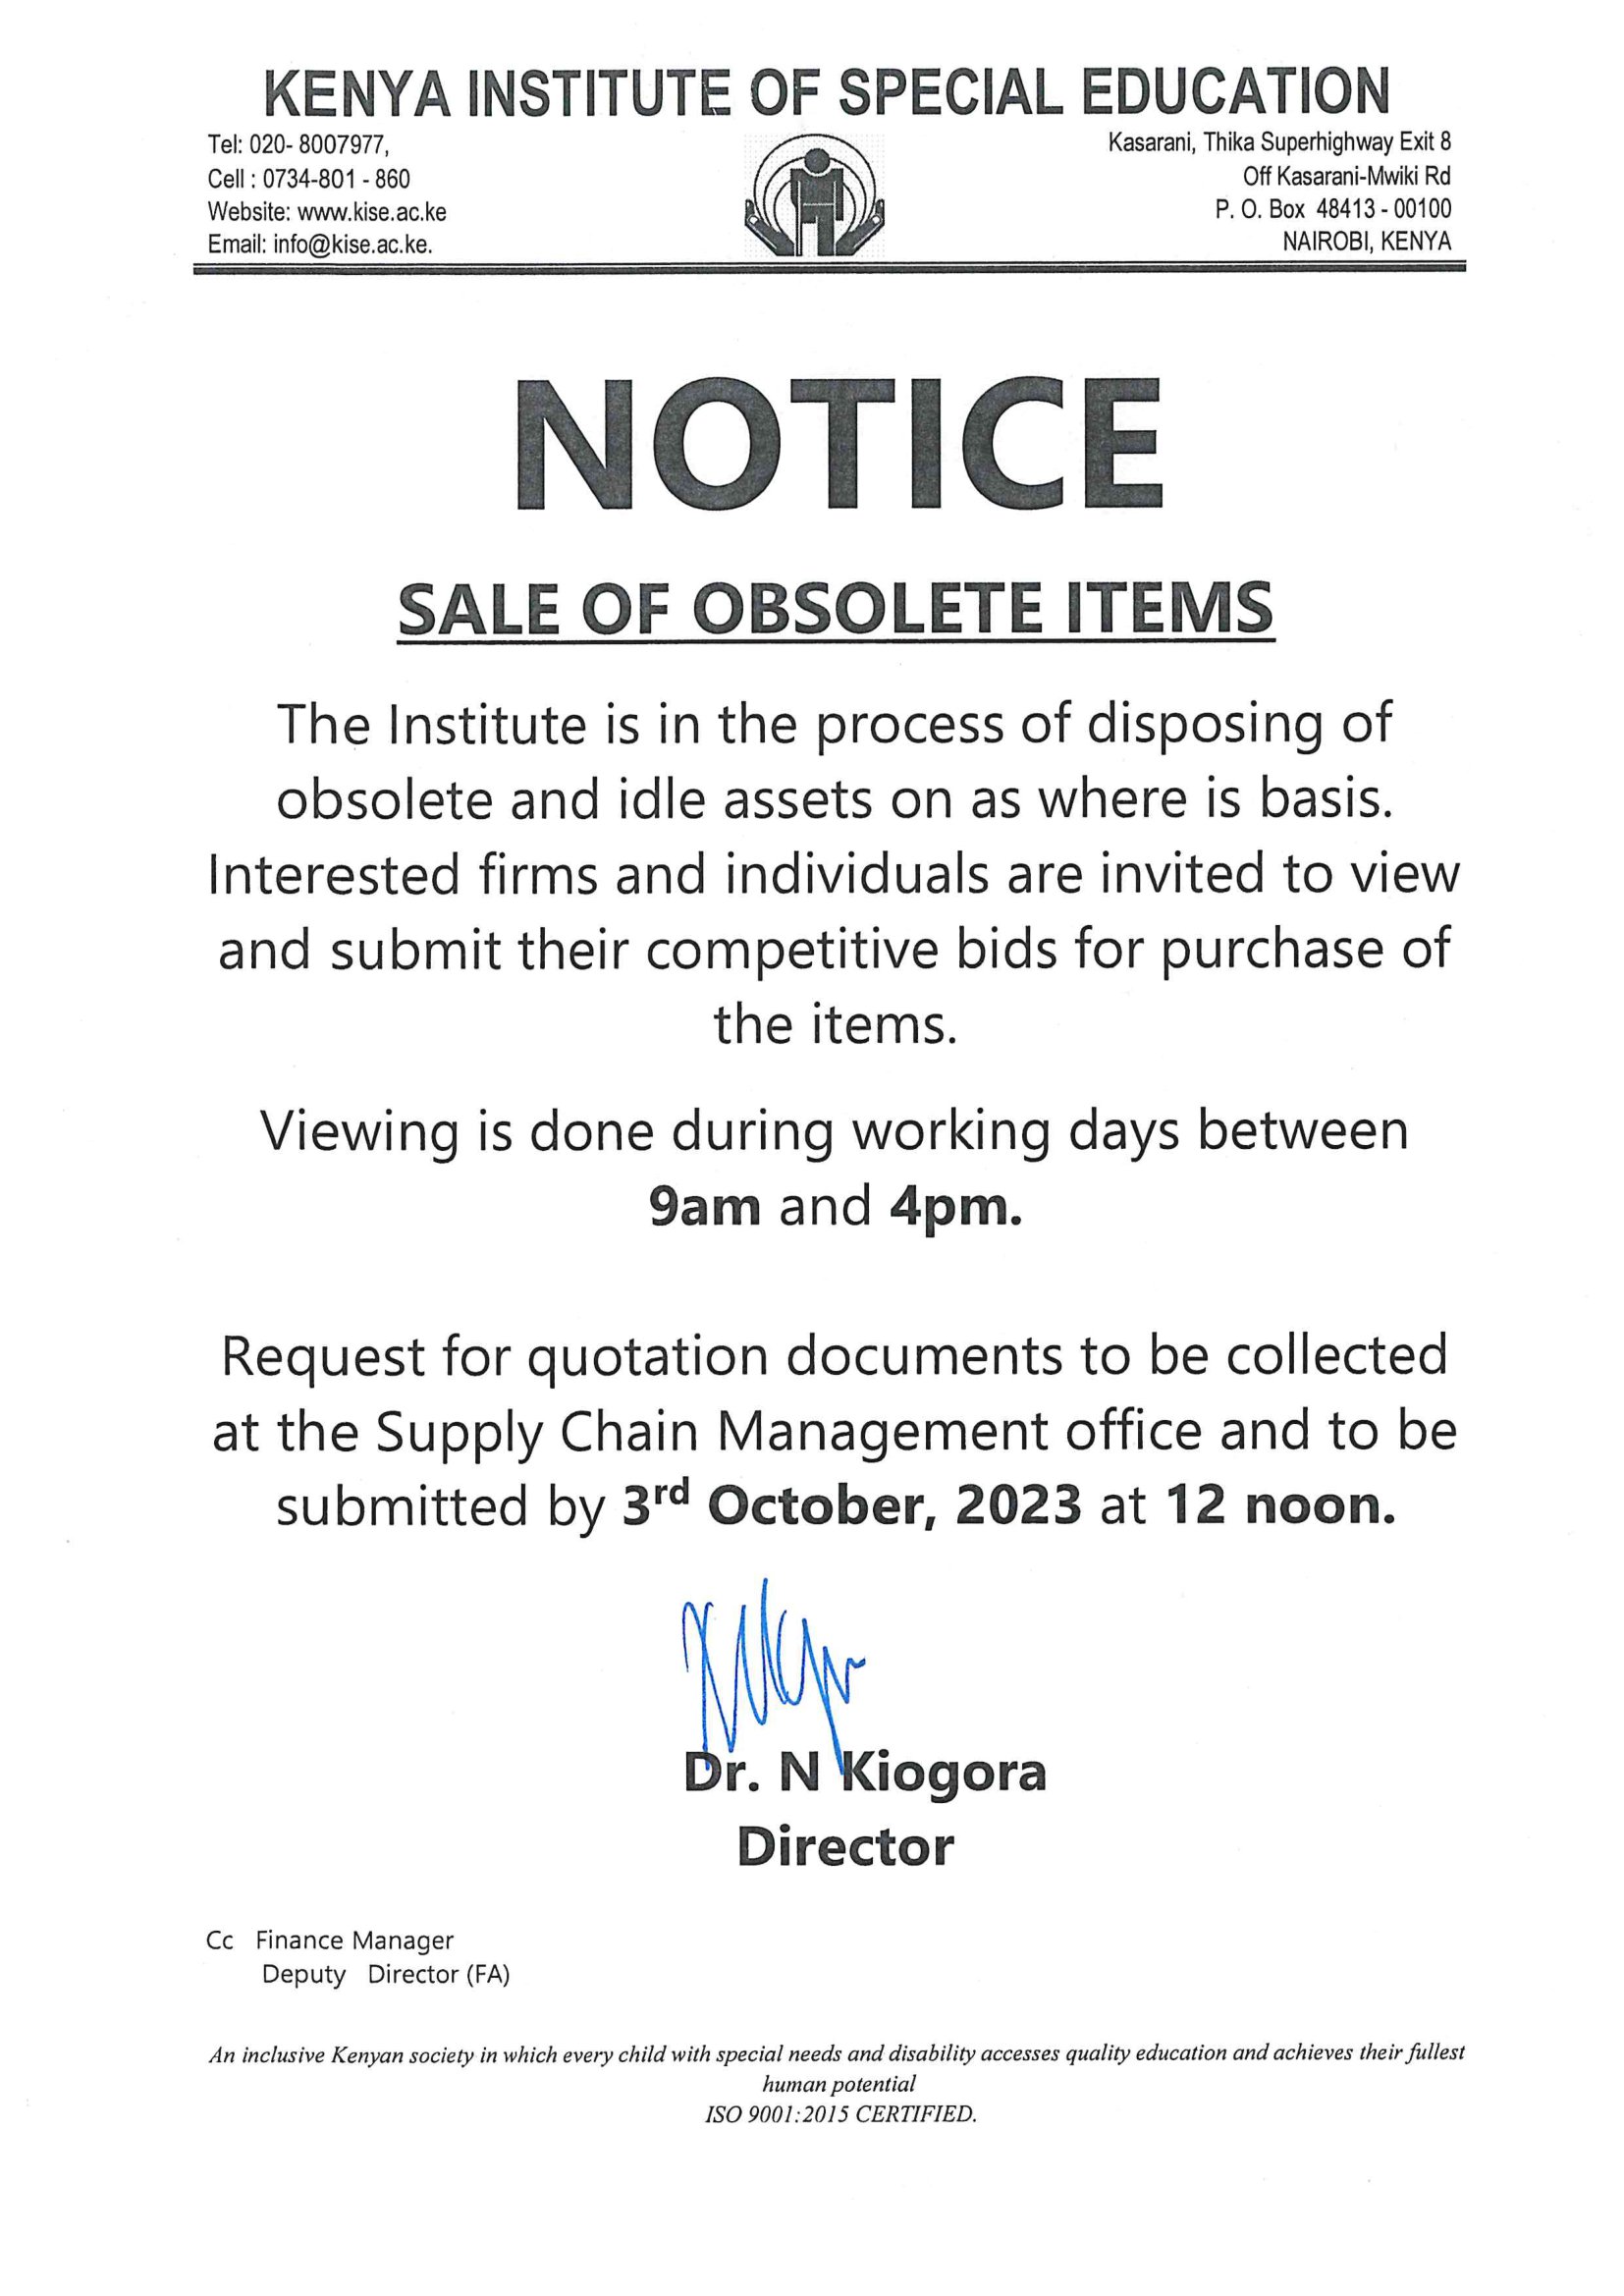 Sale of obsolete items